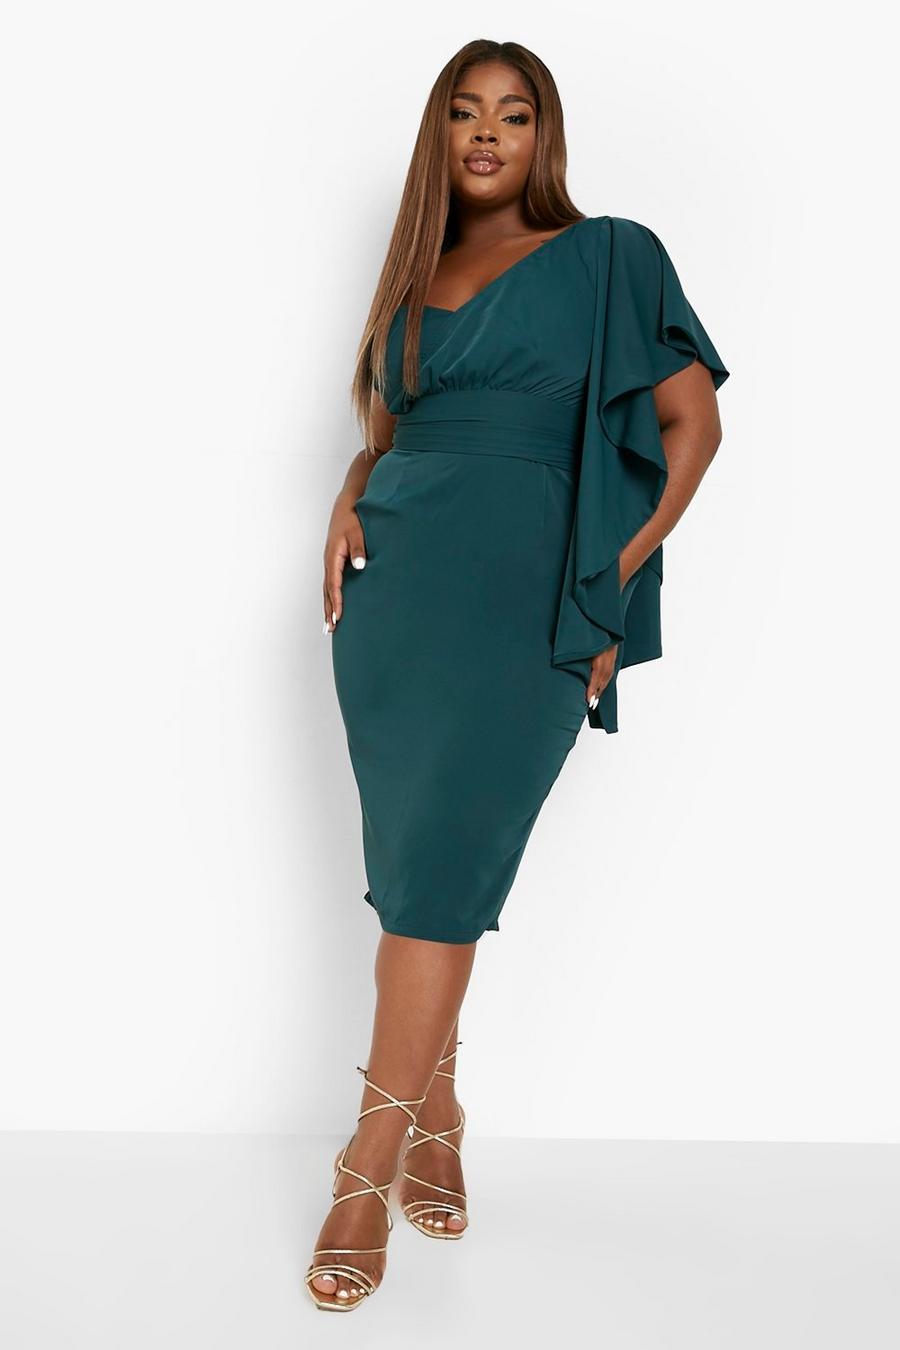 Eclectic Plus Size Casual Outfit Using a Satin Slip Dress and